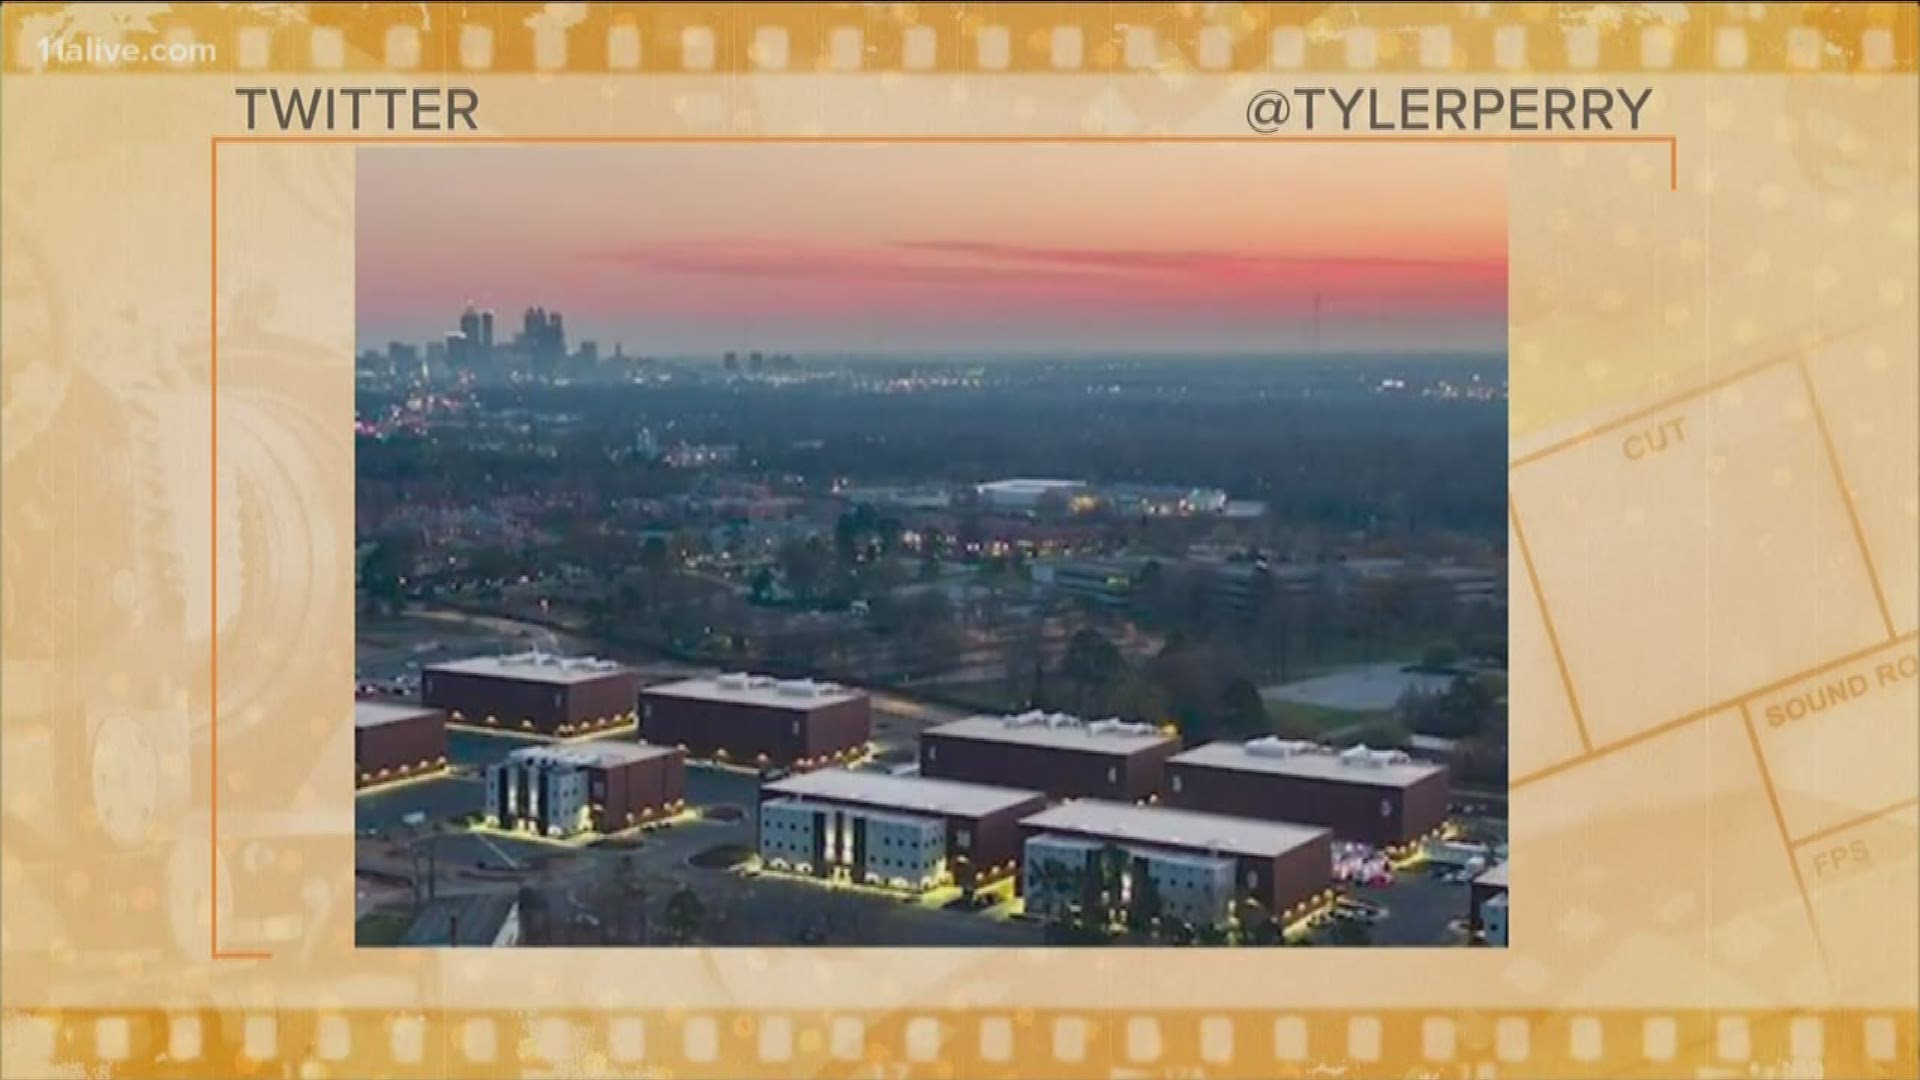 Tyler Perry Studios is now one of the largest television and motion picture studios in the world.